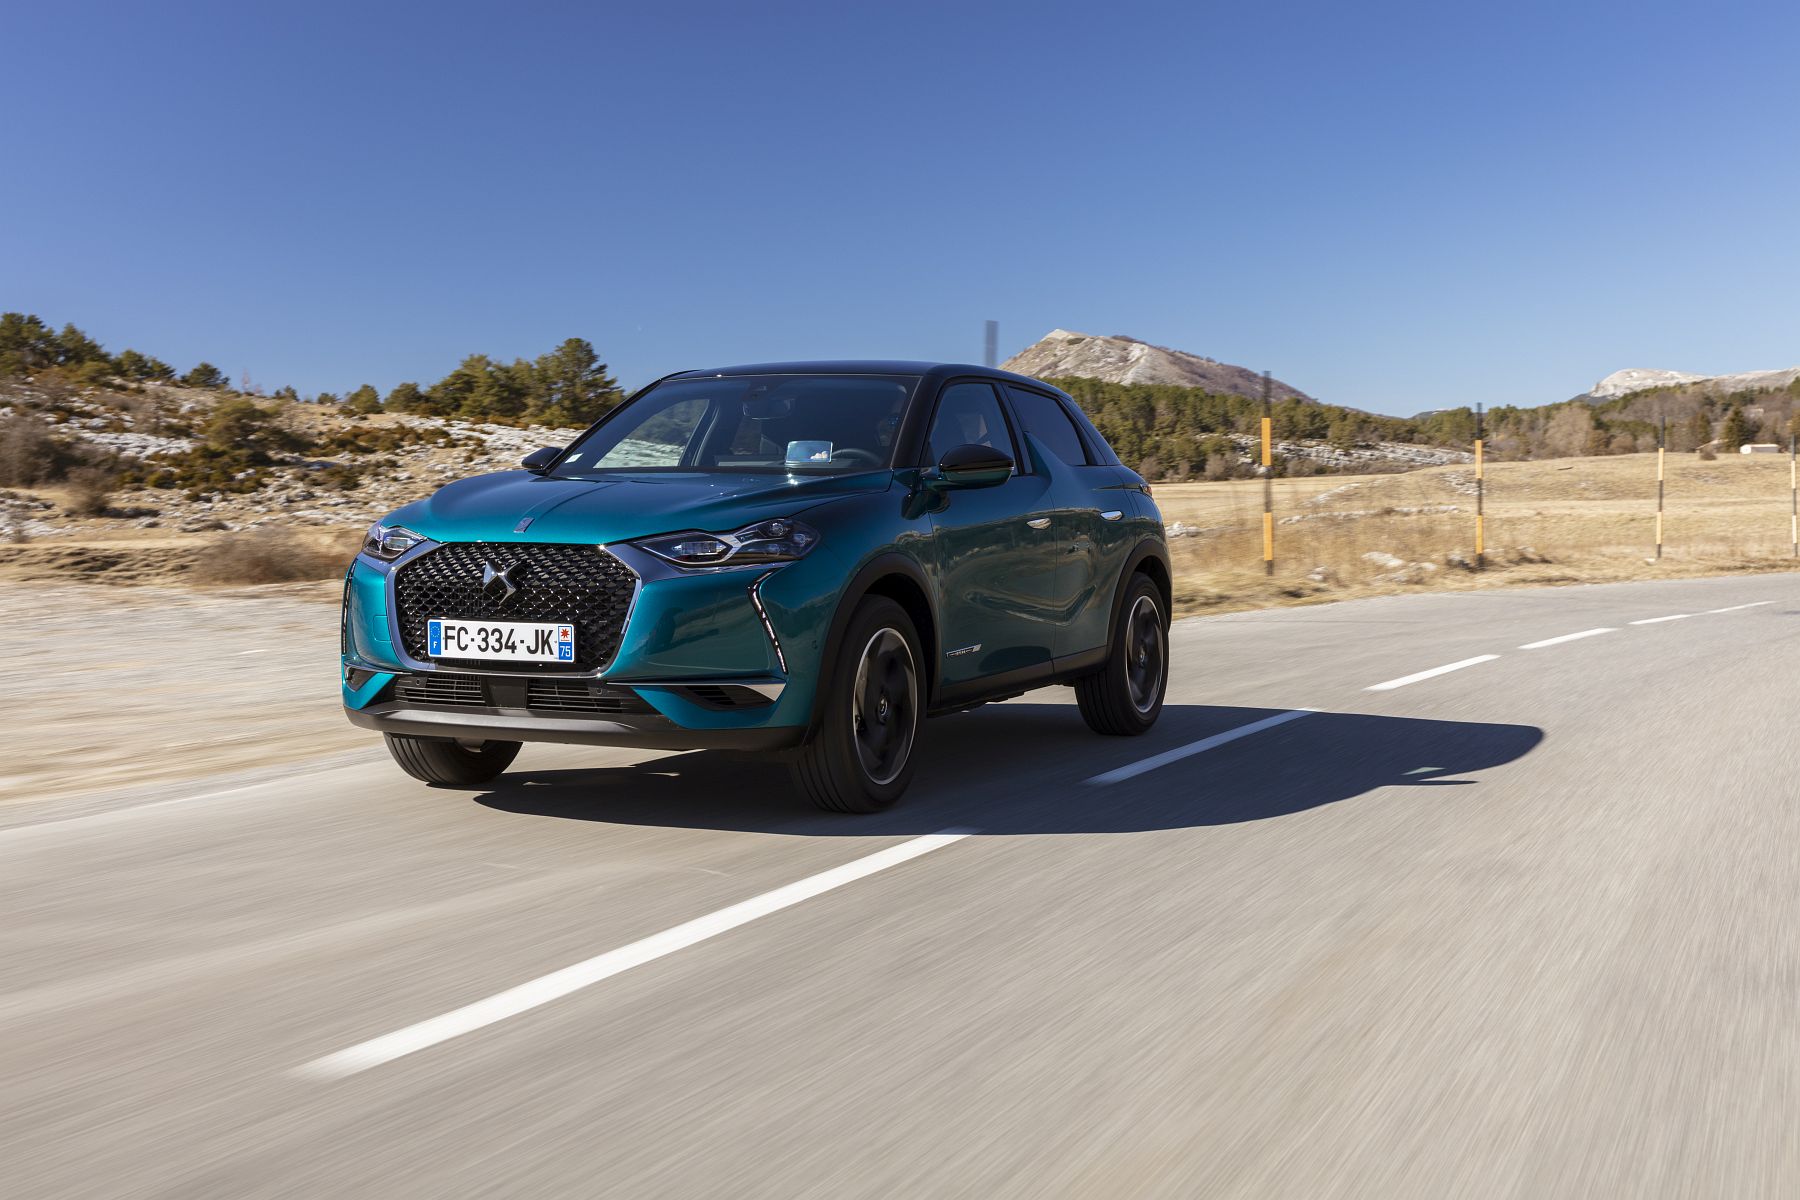 DS 3 Crossback 2019 (30)